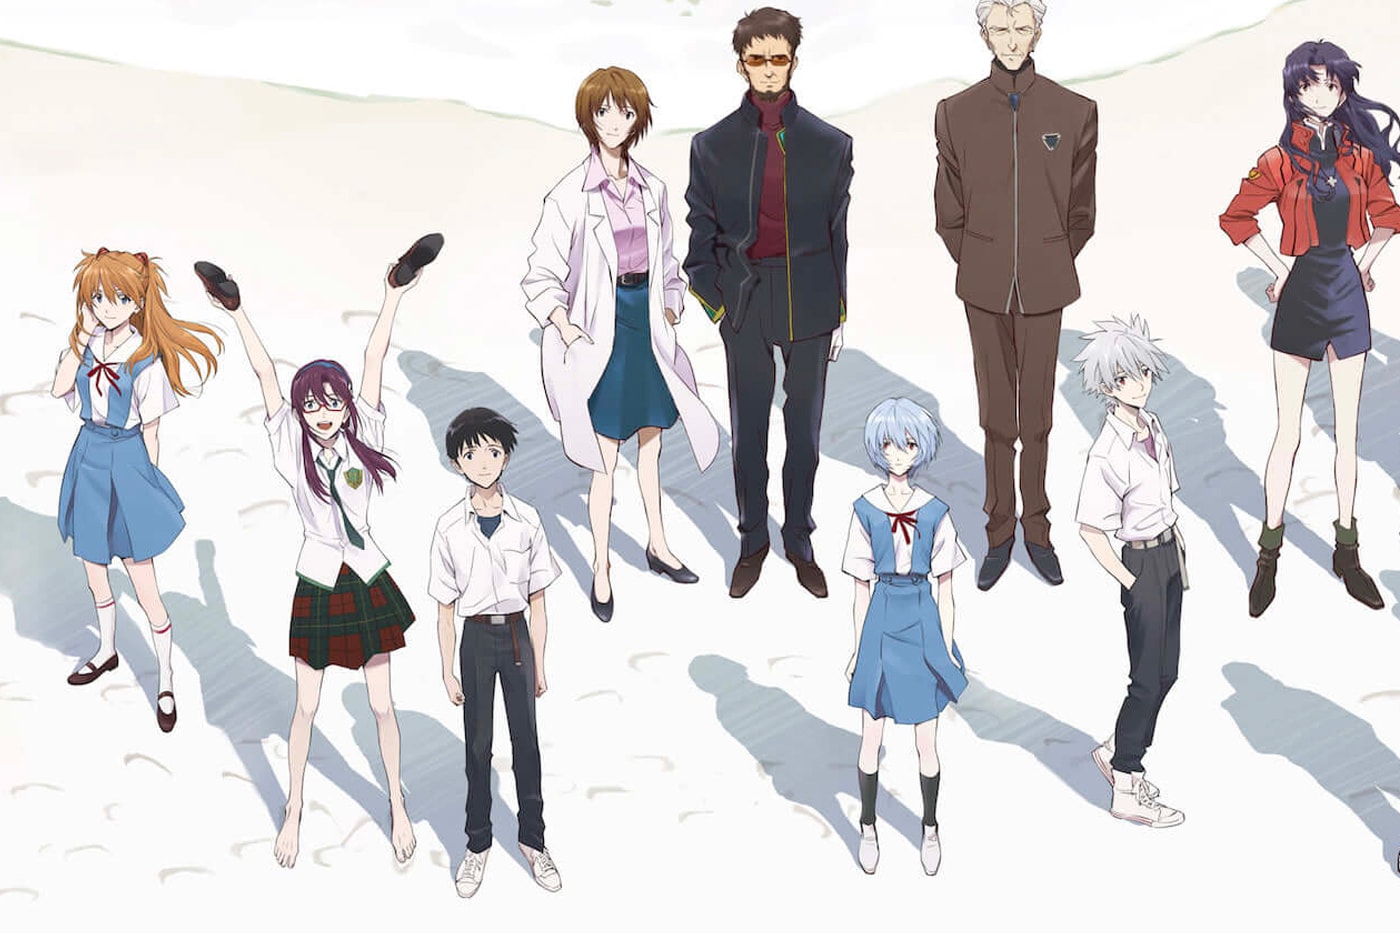 Amazon Prime Evangelion 3.0 1.01 two minute Teaser Thrice Upon A Time